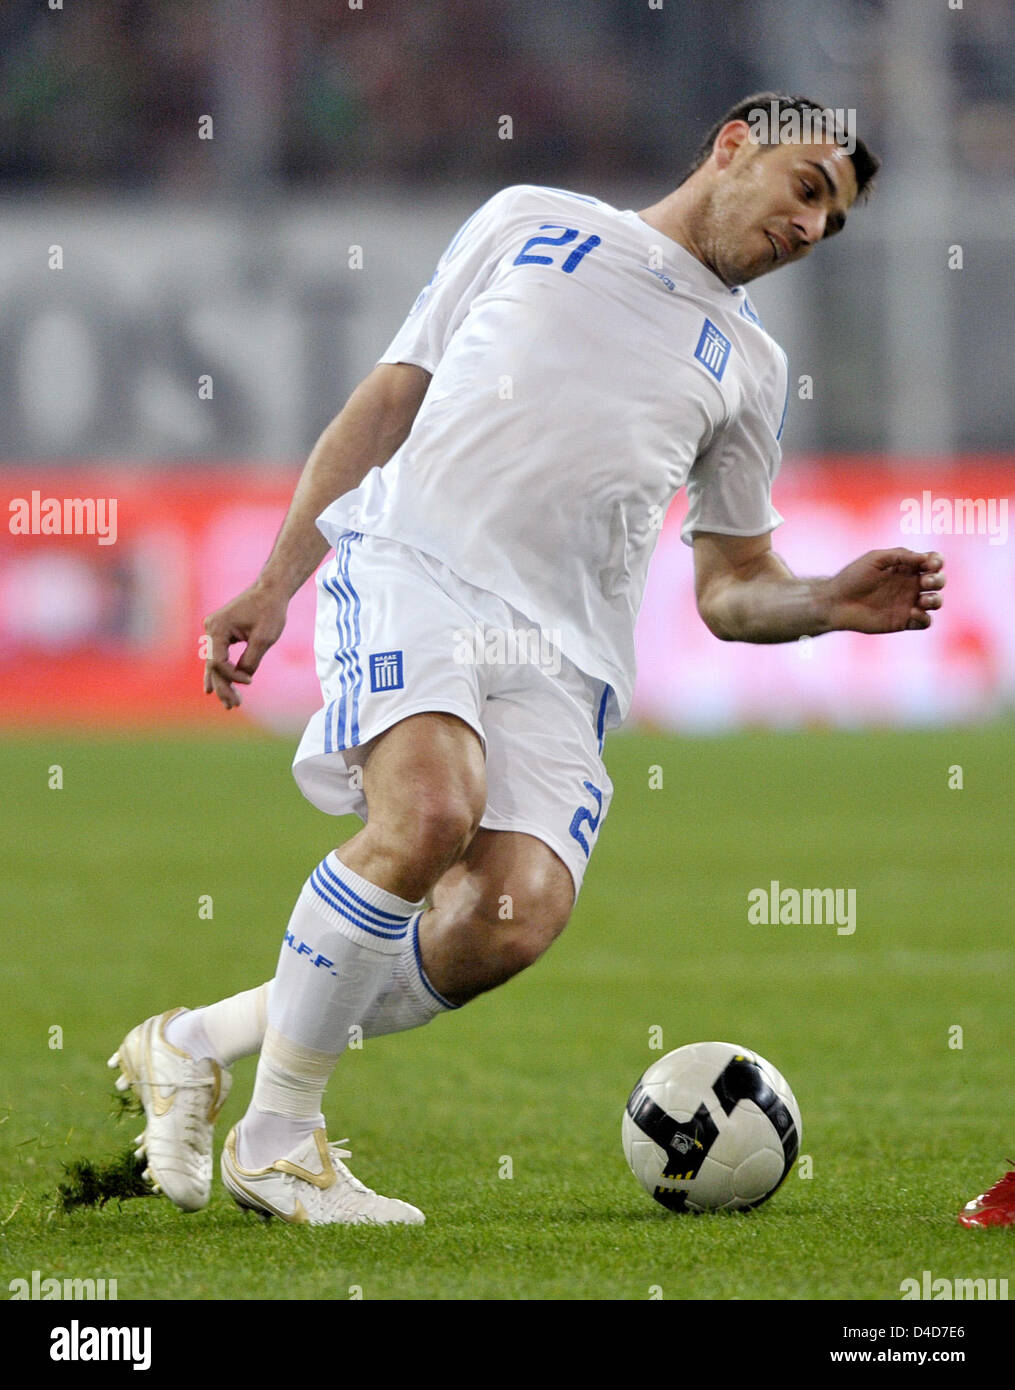 Greece's Konstantinos Katsouranis is about to chip the ball in the test cap Portugal v Greece at LTU Arena stadium in Duesseldorf, Germany, 26 March 2008. Greece defeated Portugal 2-1. Photo: Achim Scheidemann Stock Photo